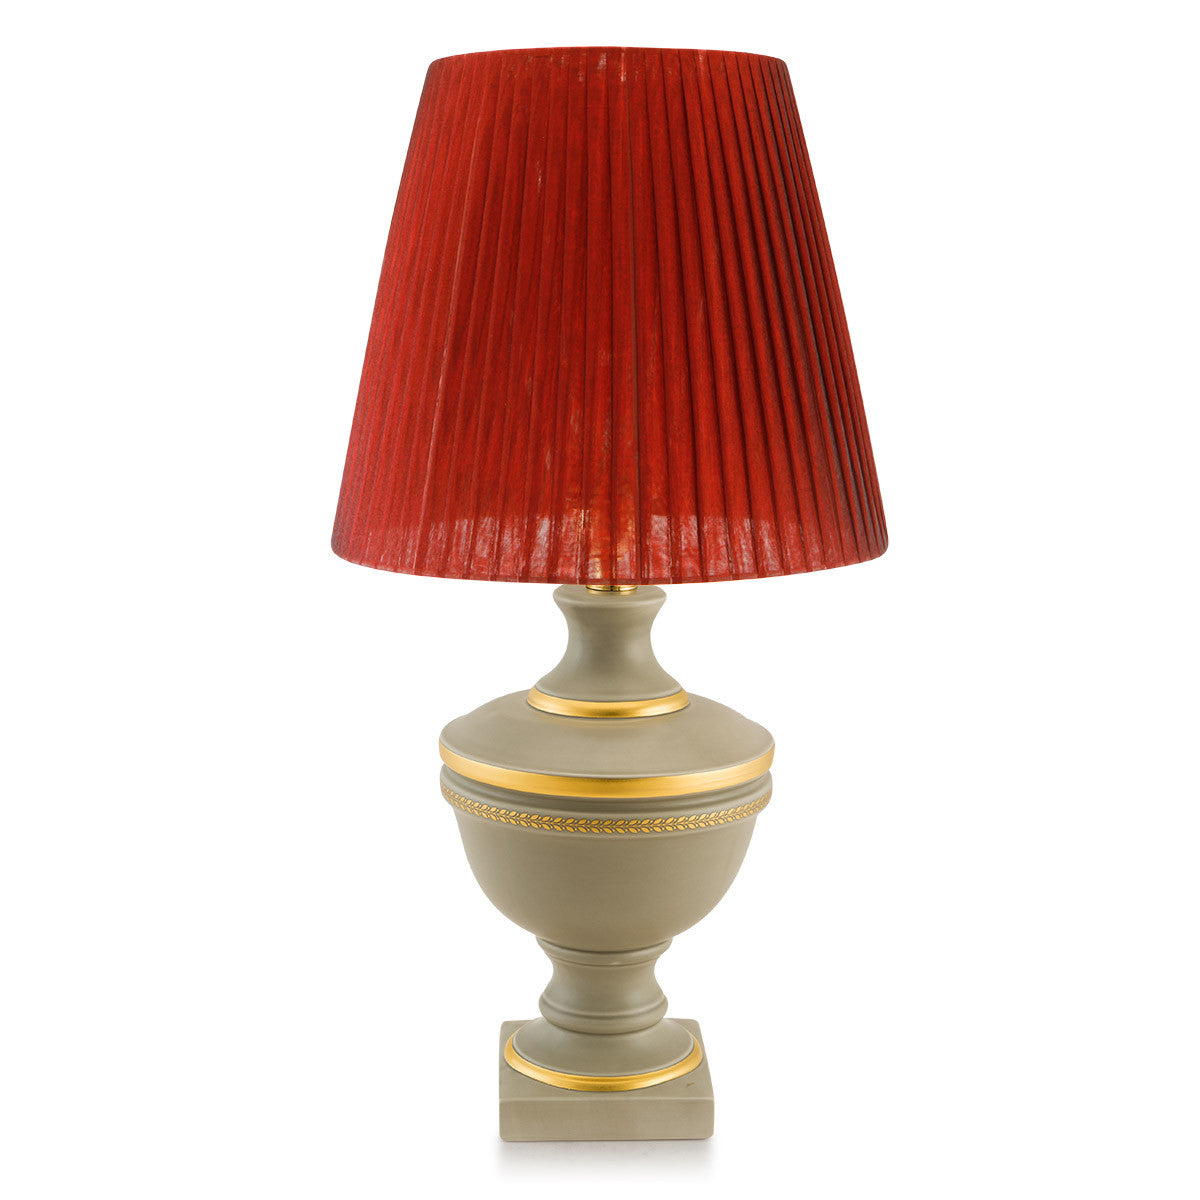 Arcade Ceramic Table Lamps High End Lamps Made In Italy